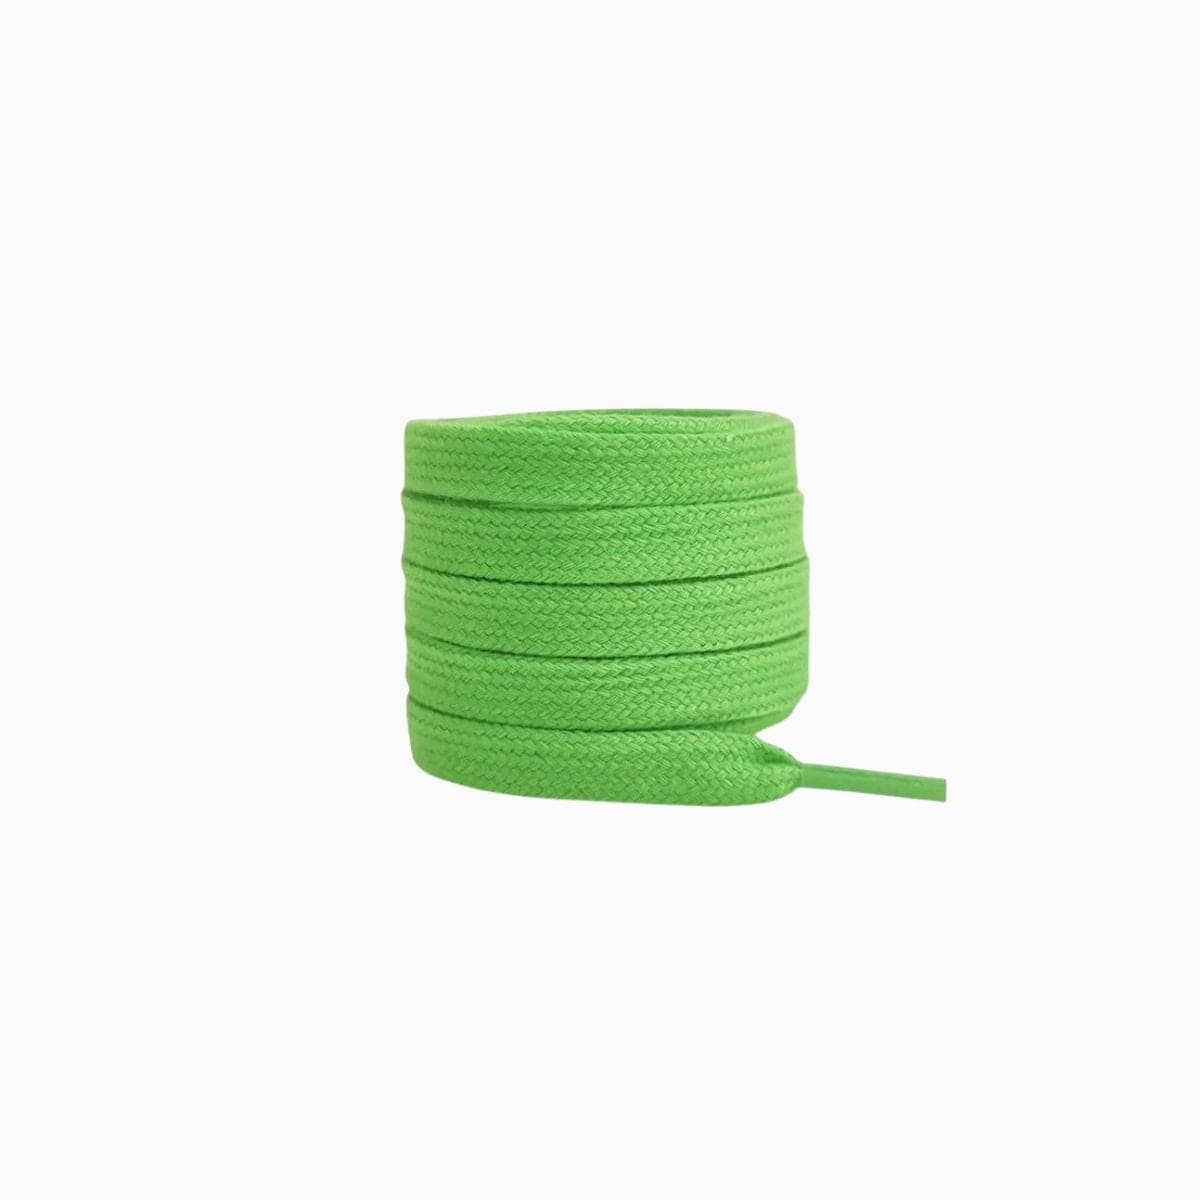 Green Replacement Adidas Shoe Laces for Adidas Gazelle Sneakers by Kicks Shoelaces